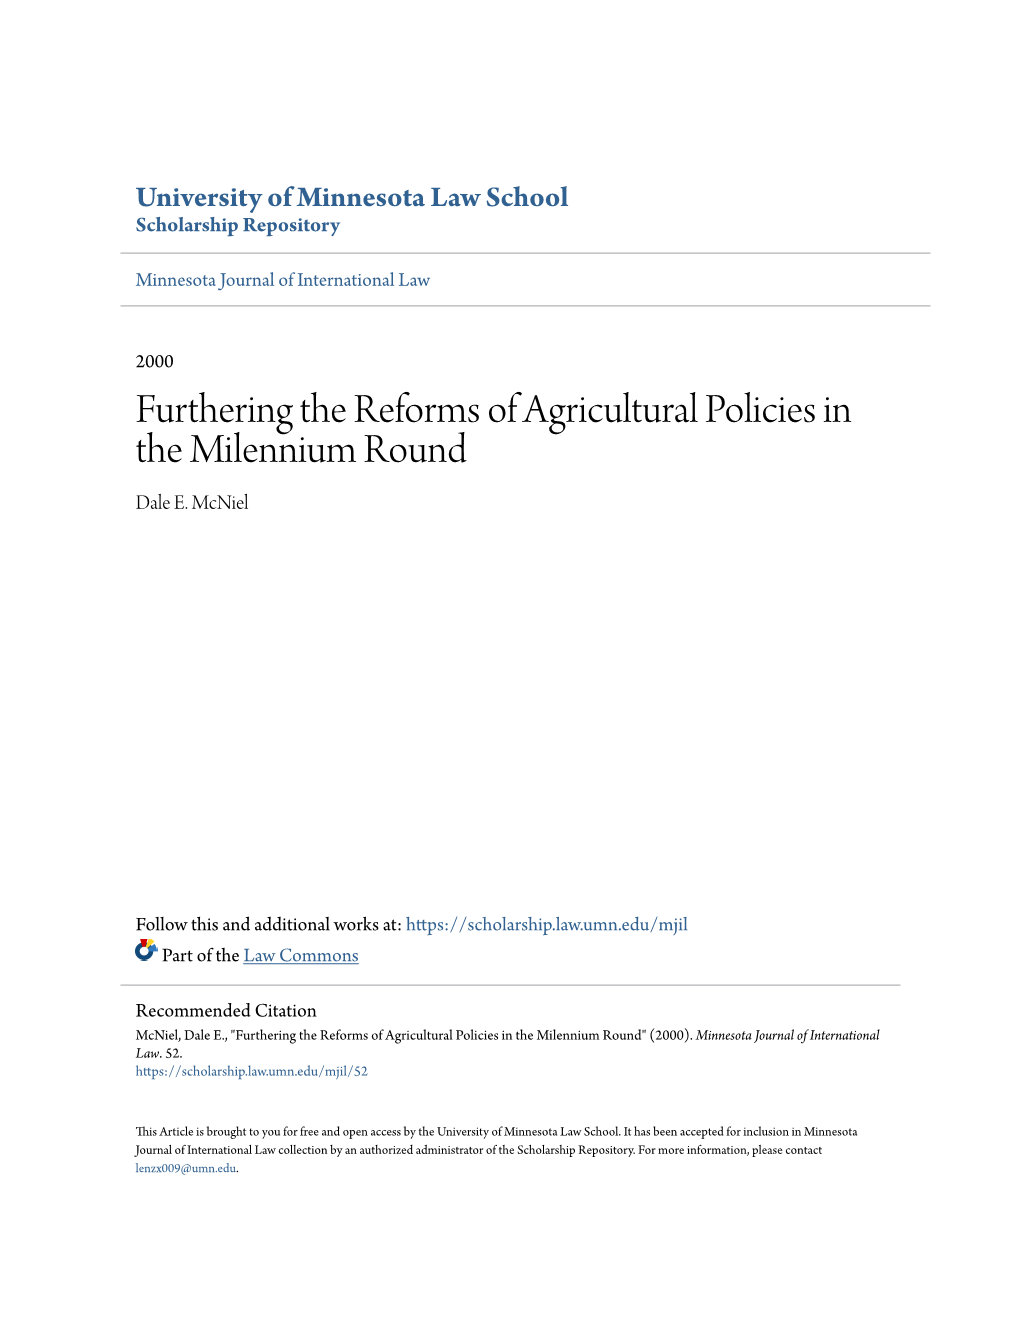 Furthering the Reforms of Agricultural Policies in the Milennium Round Dale E